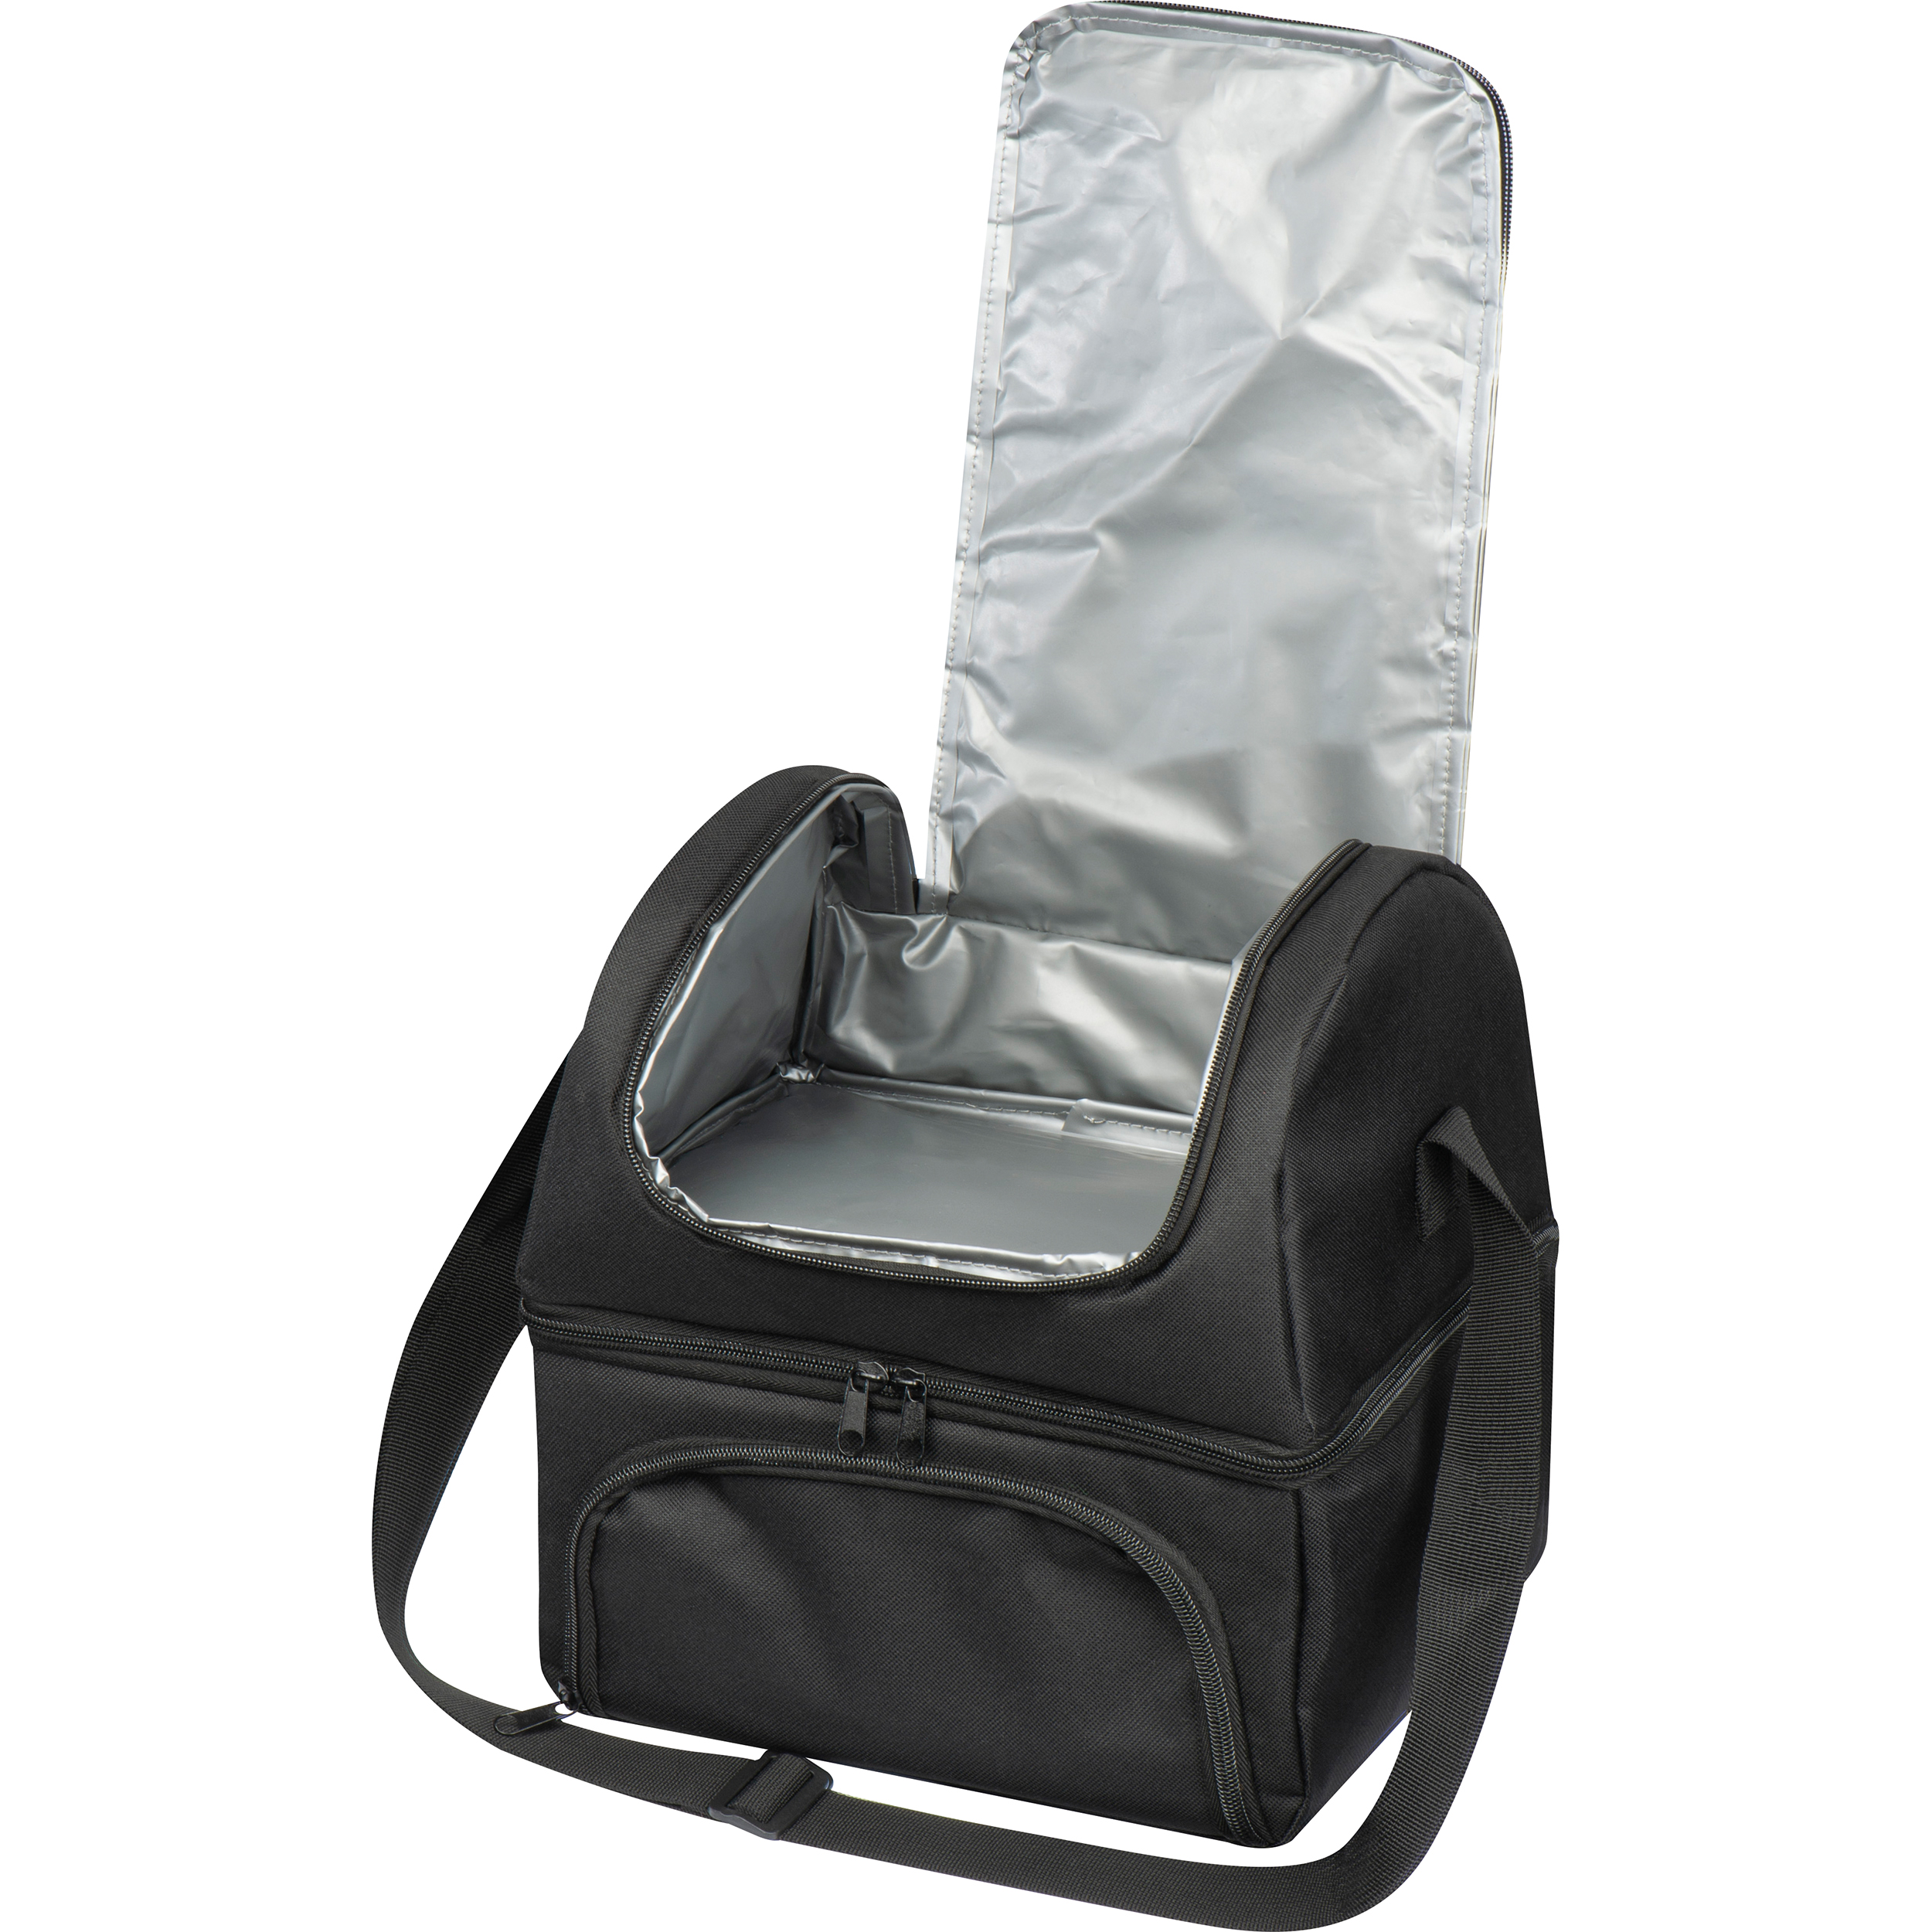 Cooler bag with 2 compartments - includes a glass foodcontainer